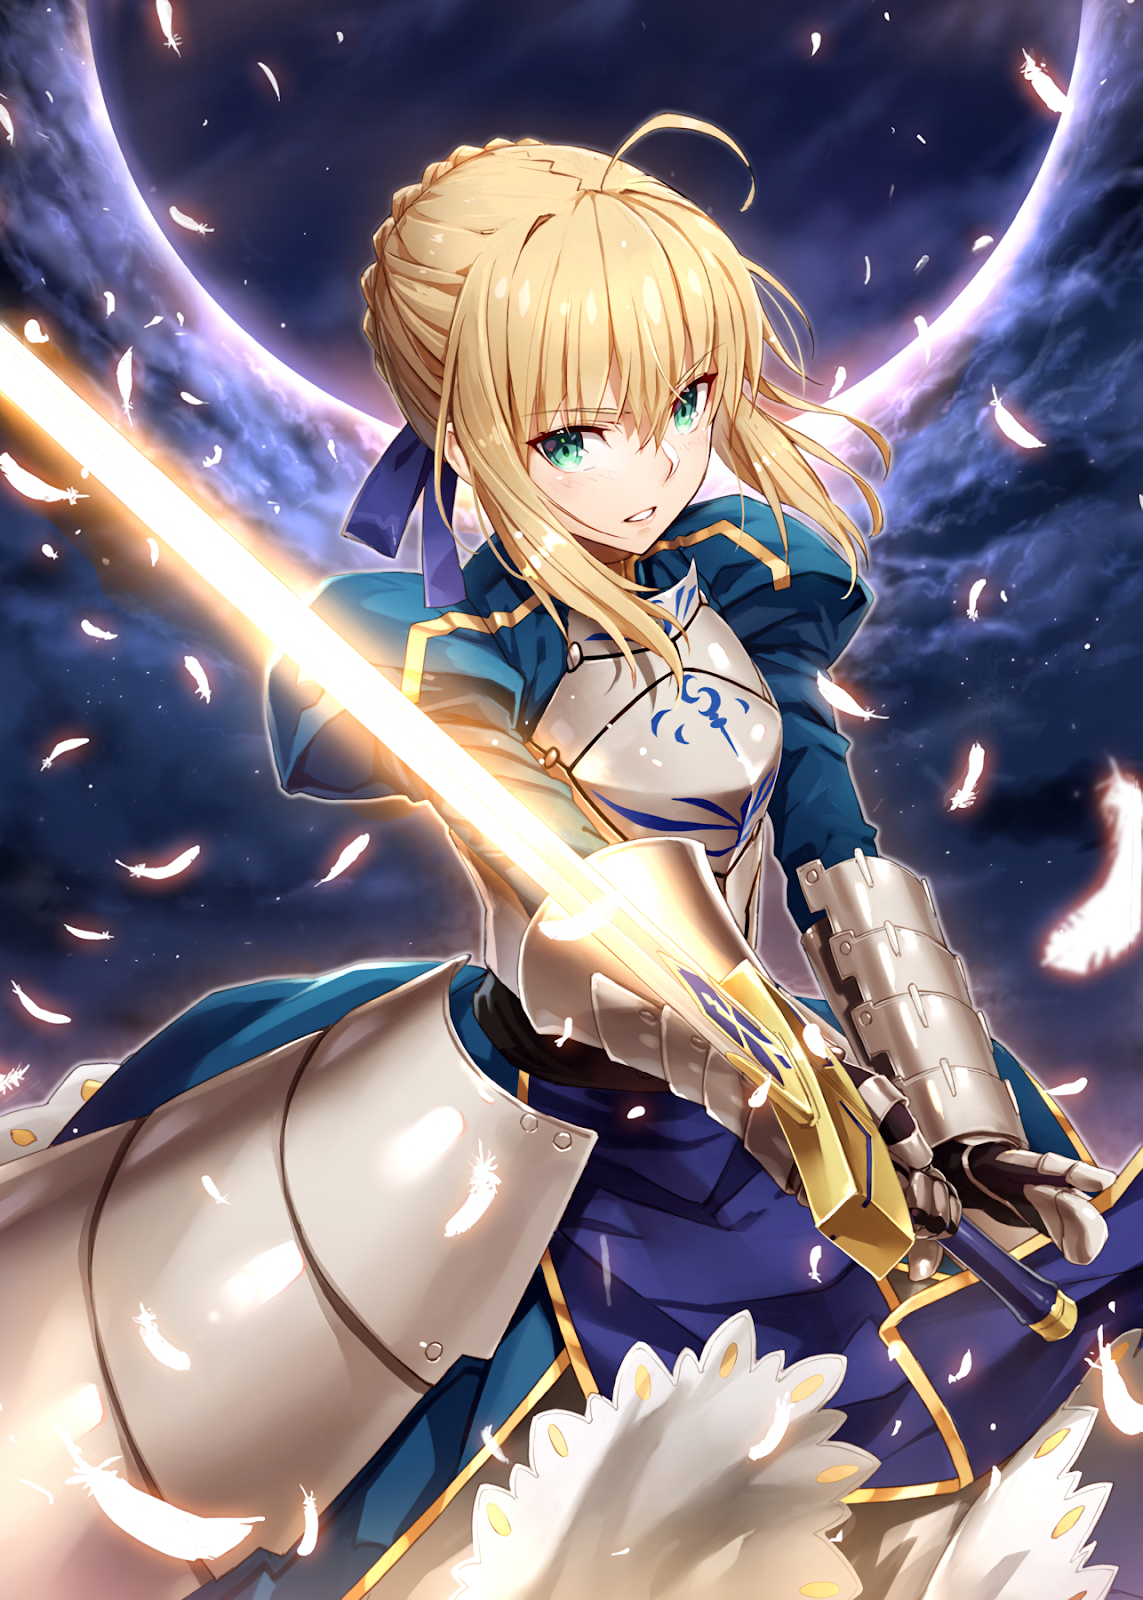 Fate character  Fate stay night anime, Fate anime series, Anime